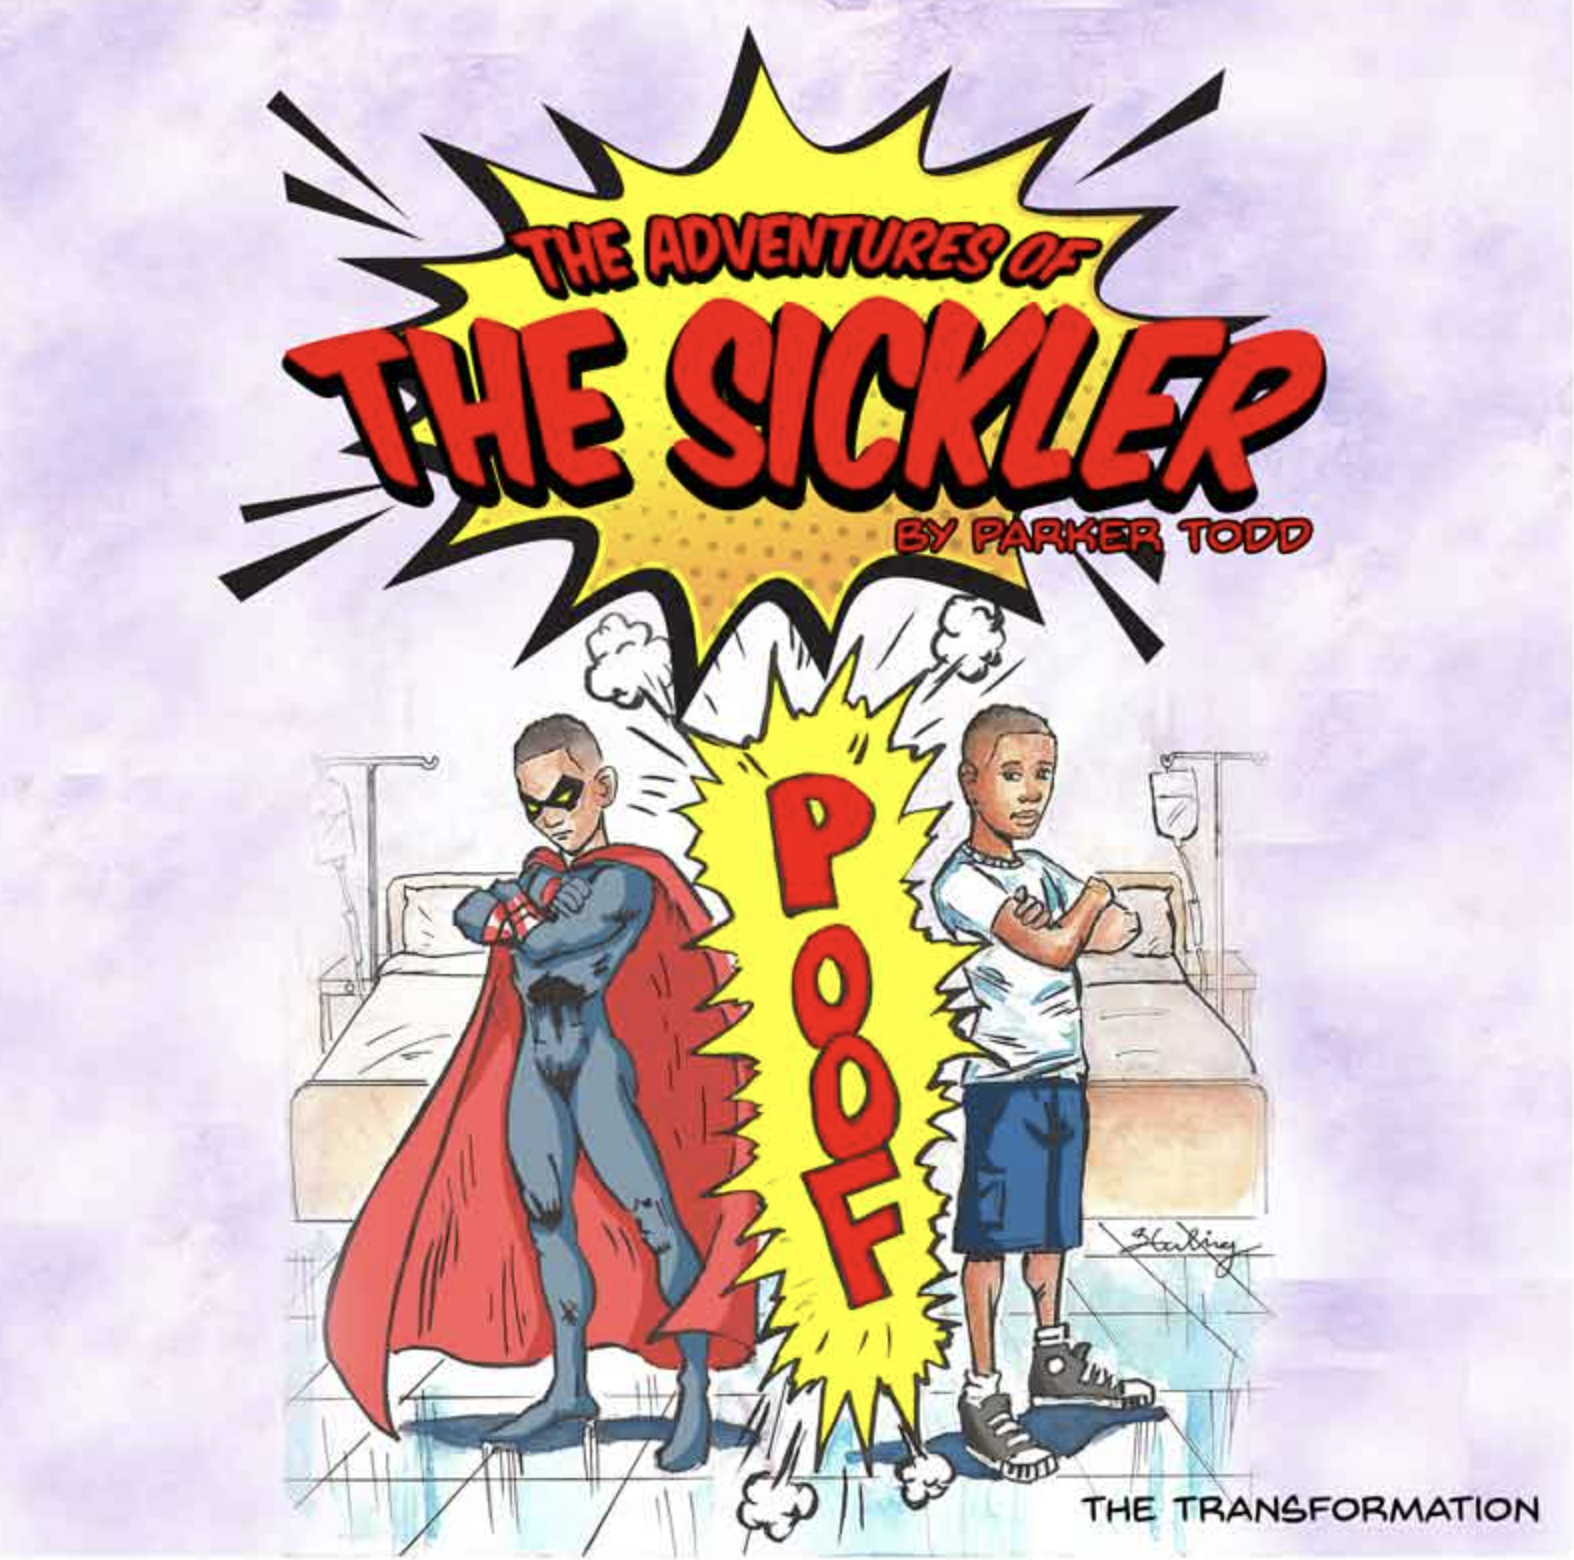 Book cover image of The Adventures of the Sickler